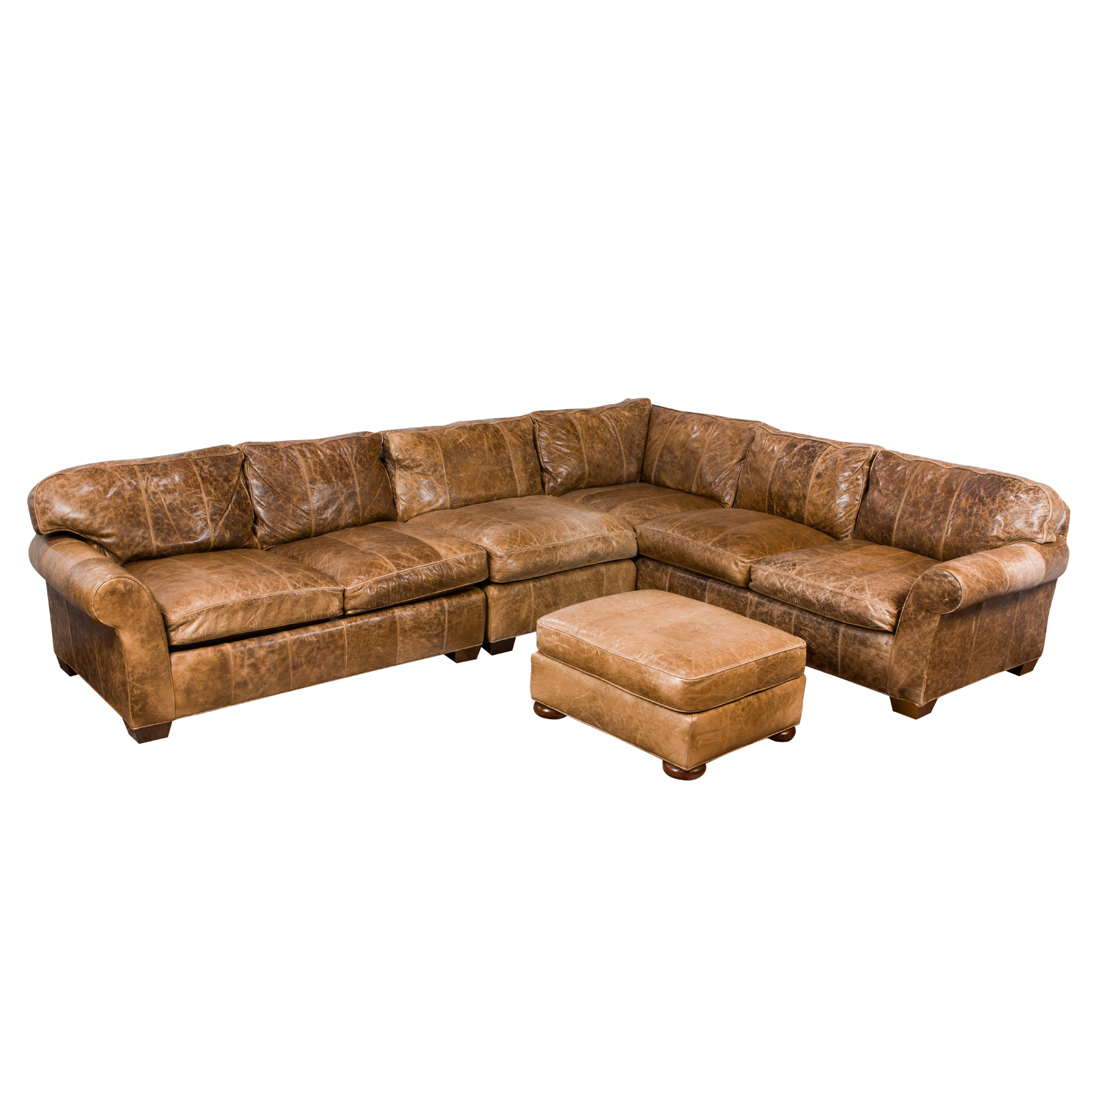 A CONTEMPORARY BROWN LEATHER SECTIONAL 2d2b4e